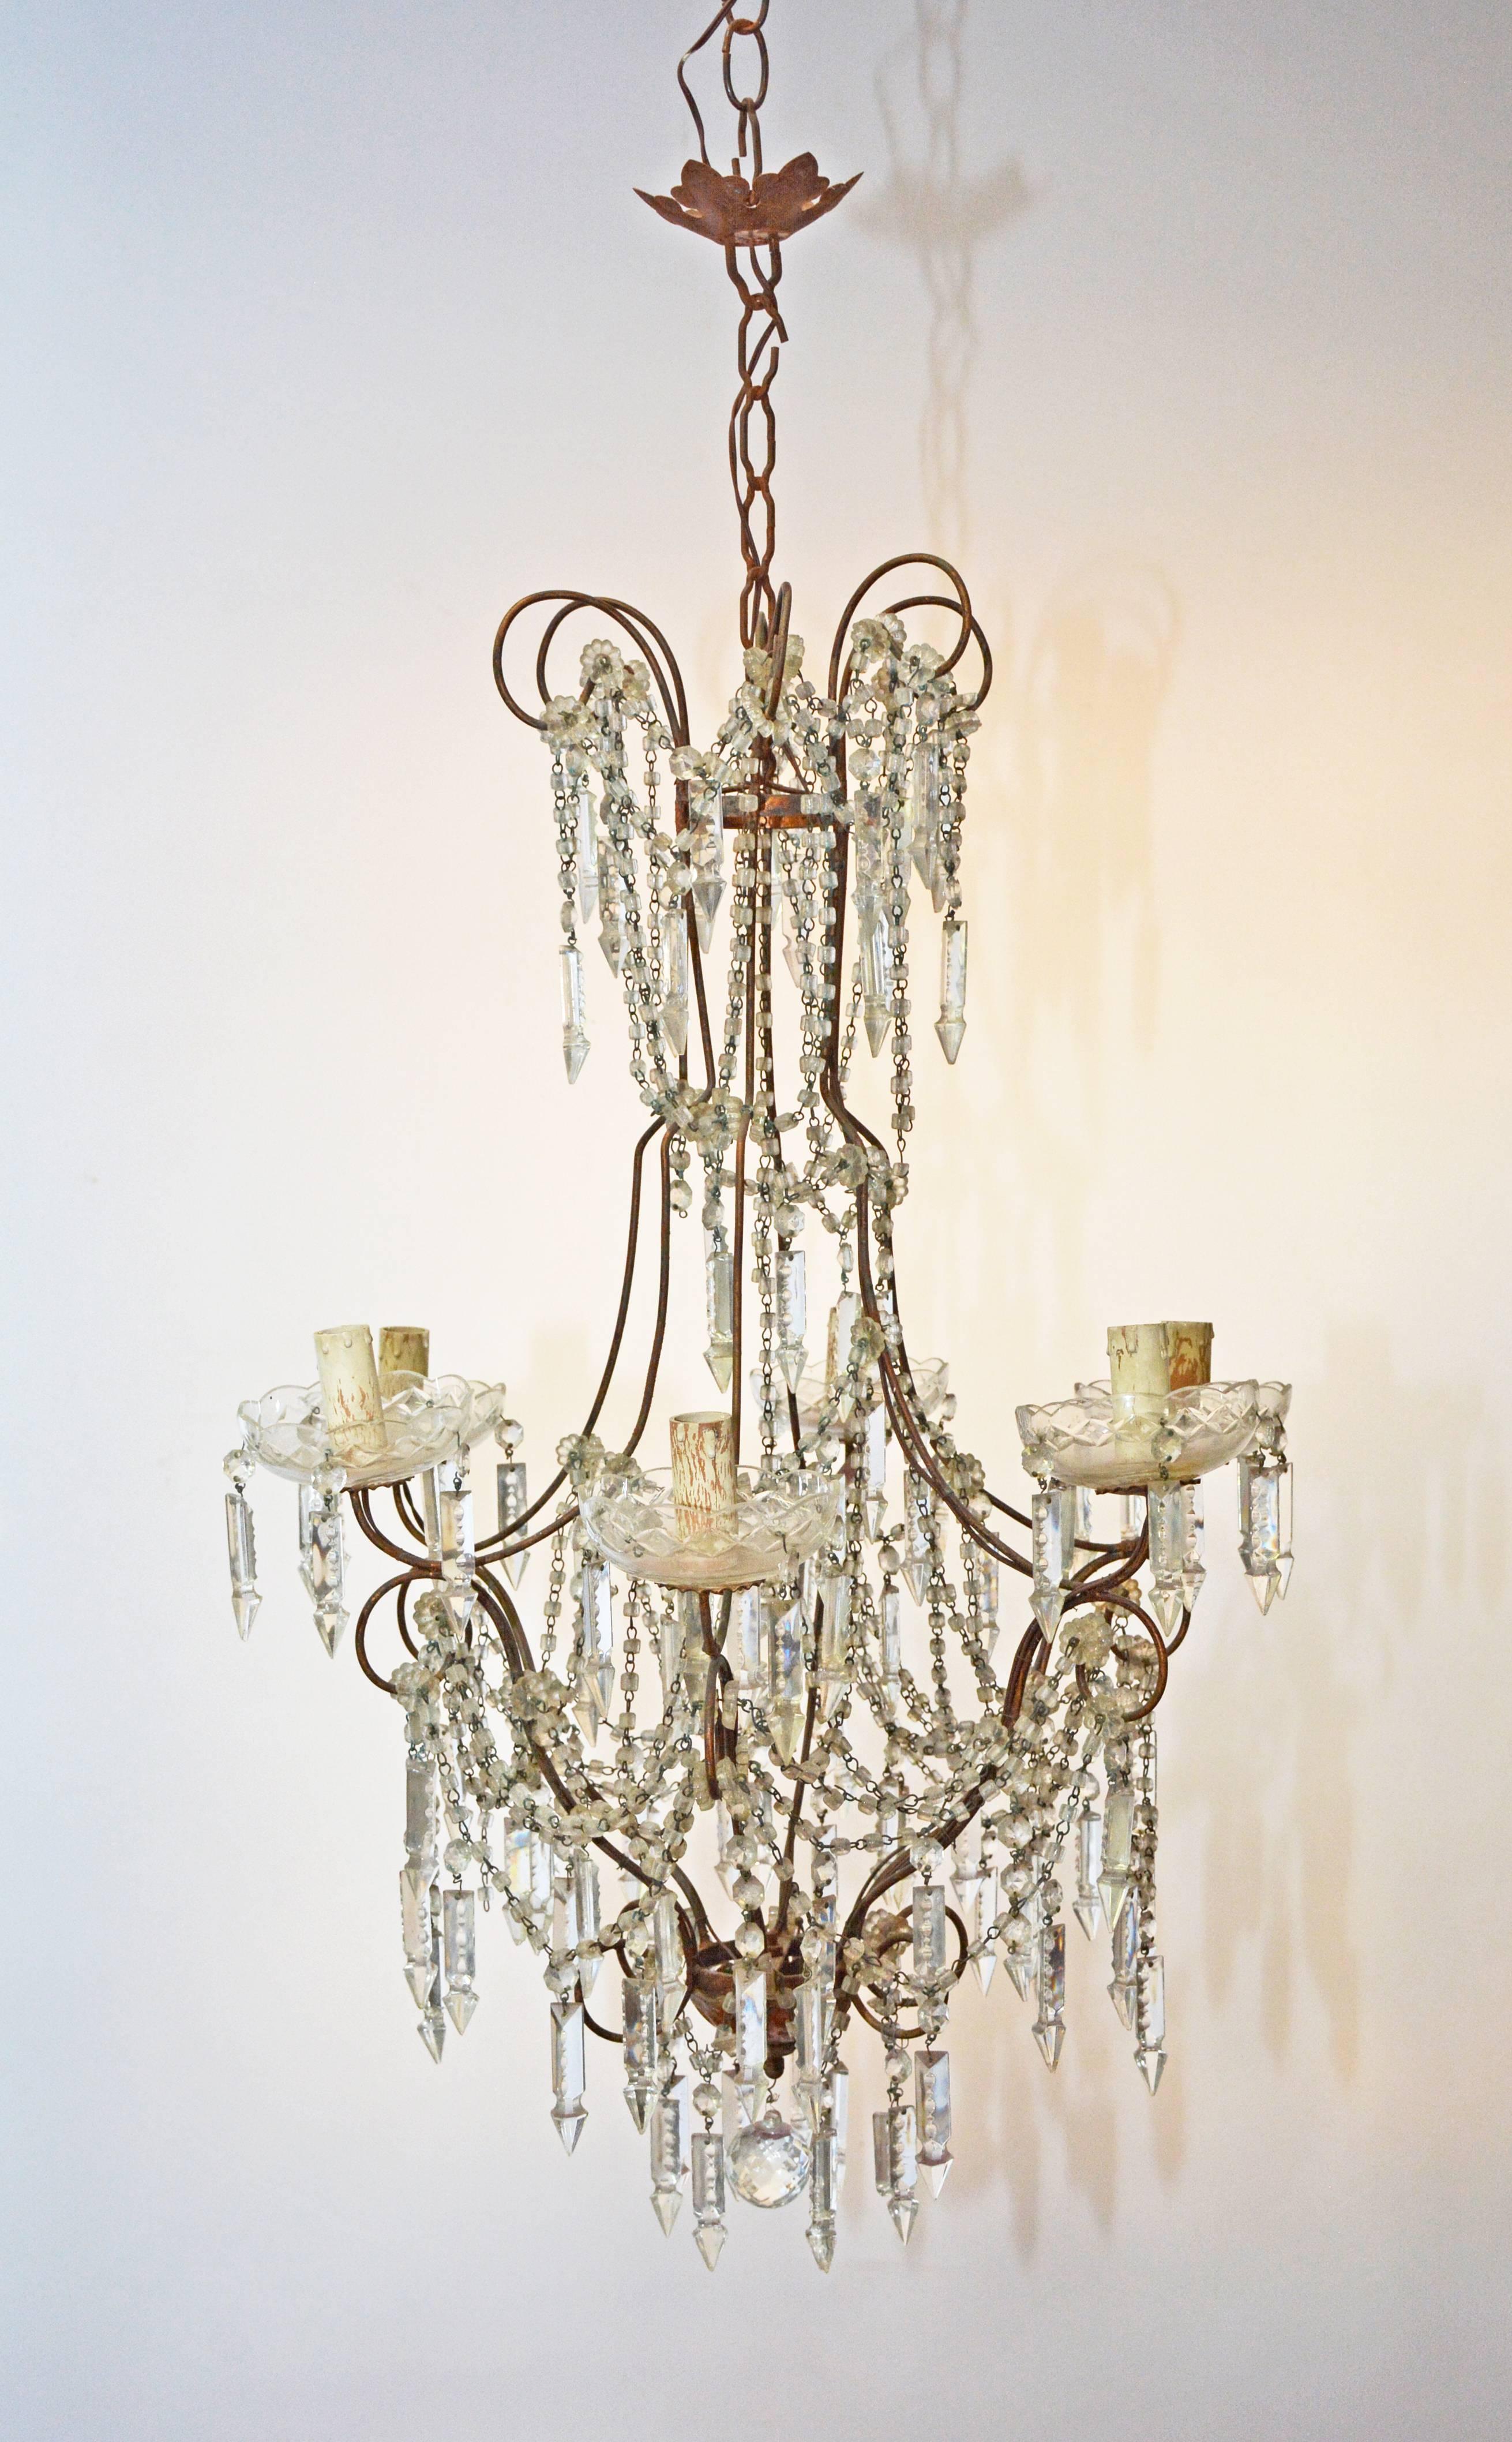 The classical vintage six-branch crystal chandelier is composed of a thin-tube frame from which hang icicle-type drops and overlapping ropes of crystals at two levels. Crystal bobeches support the light fixtures which take flame bulbs. The